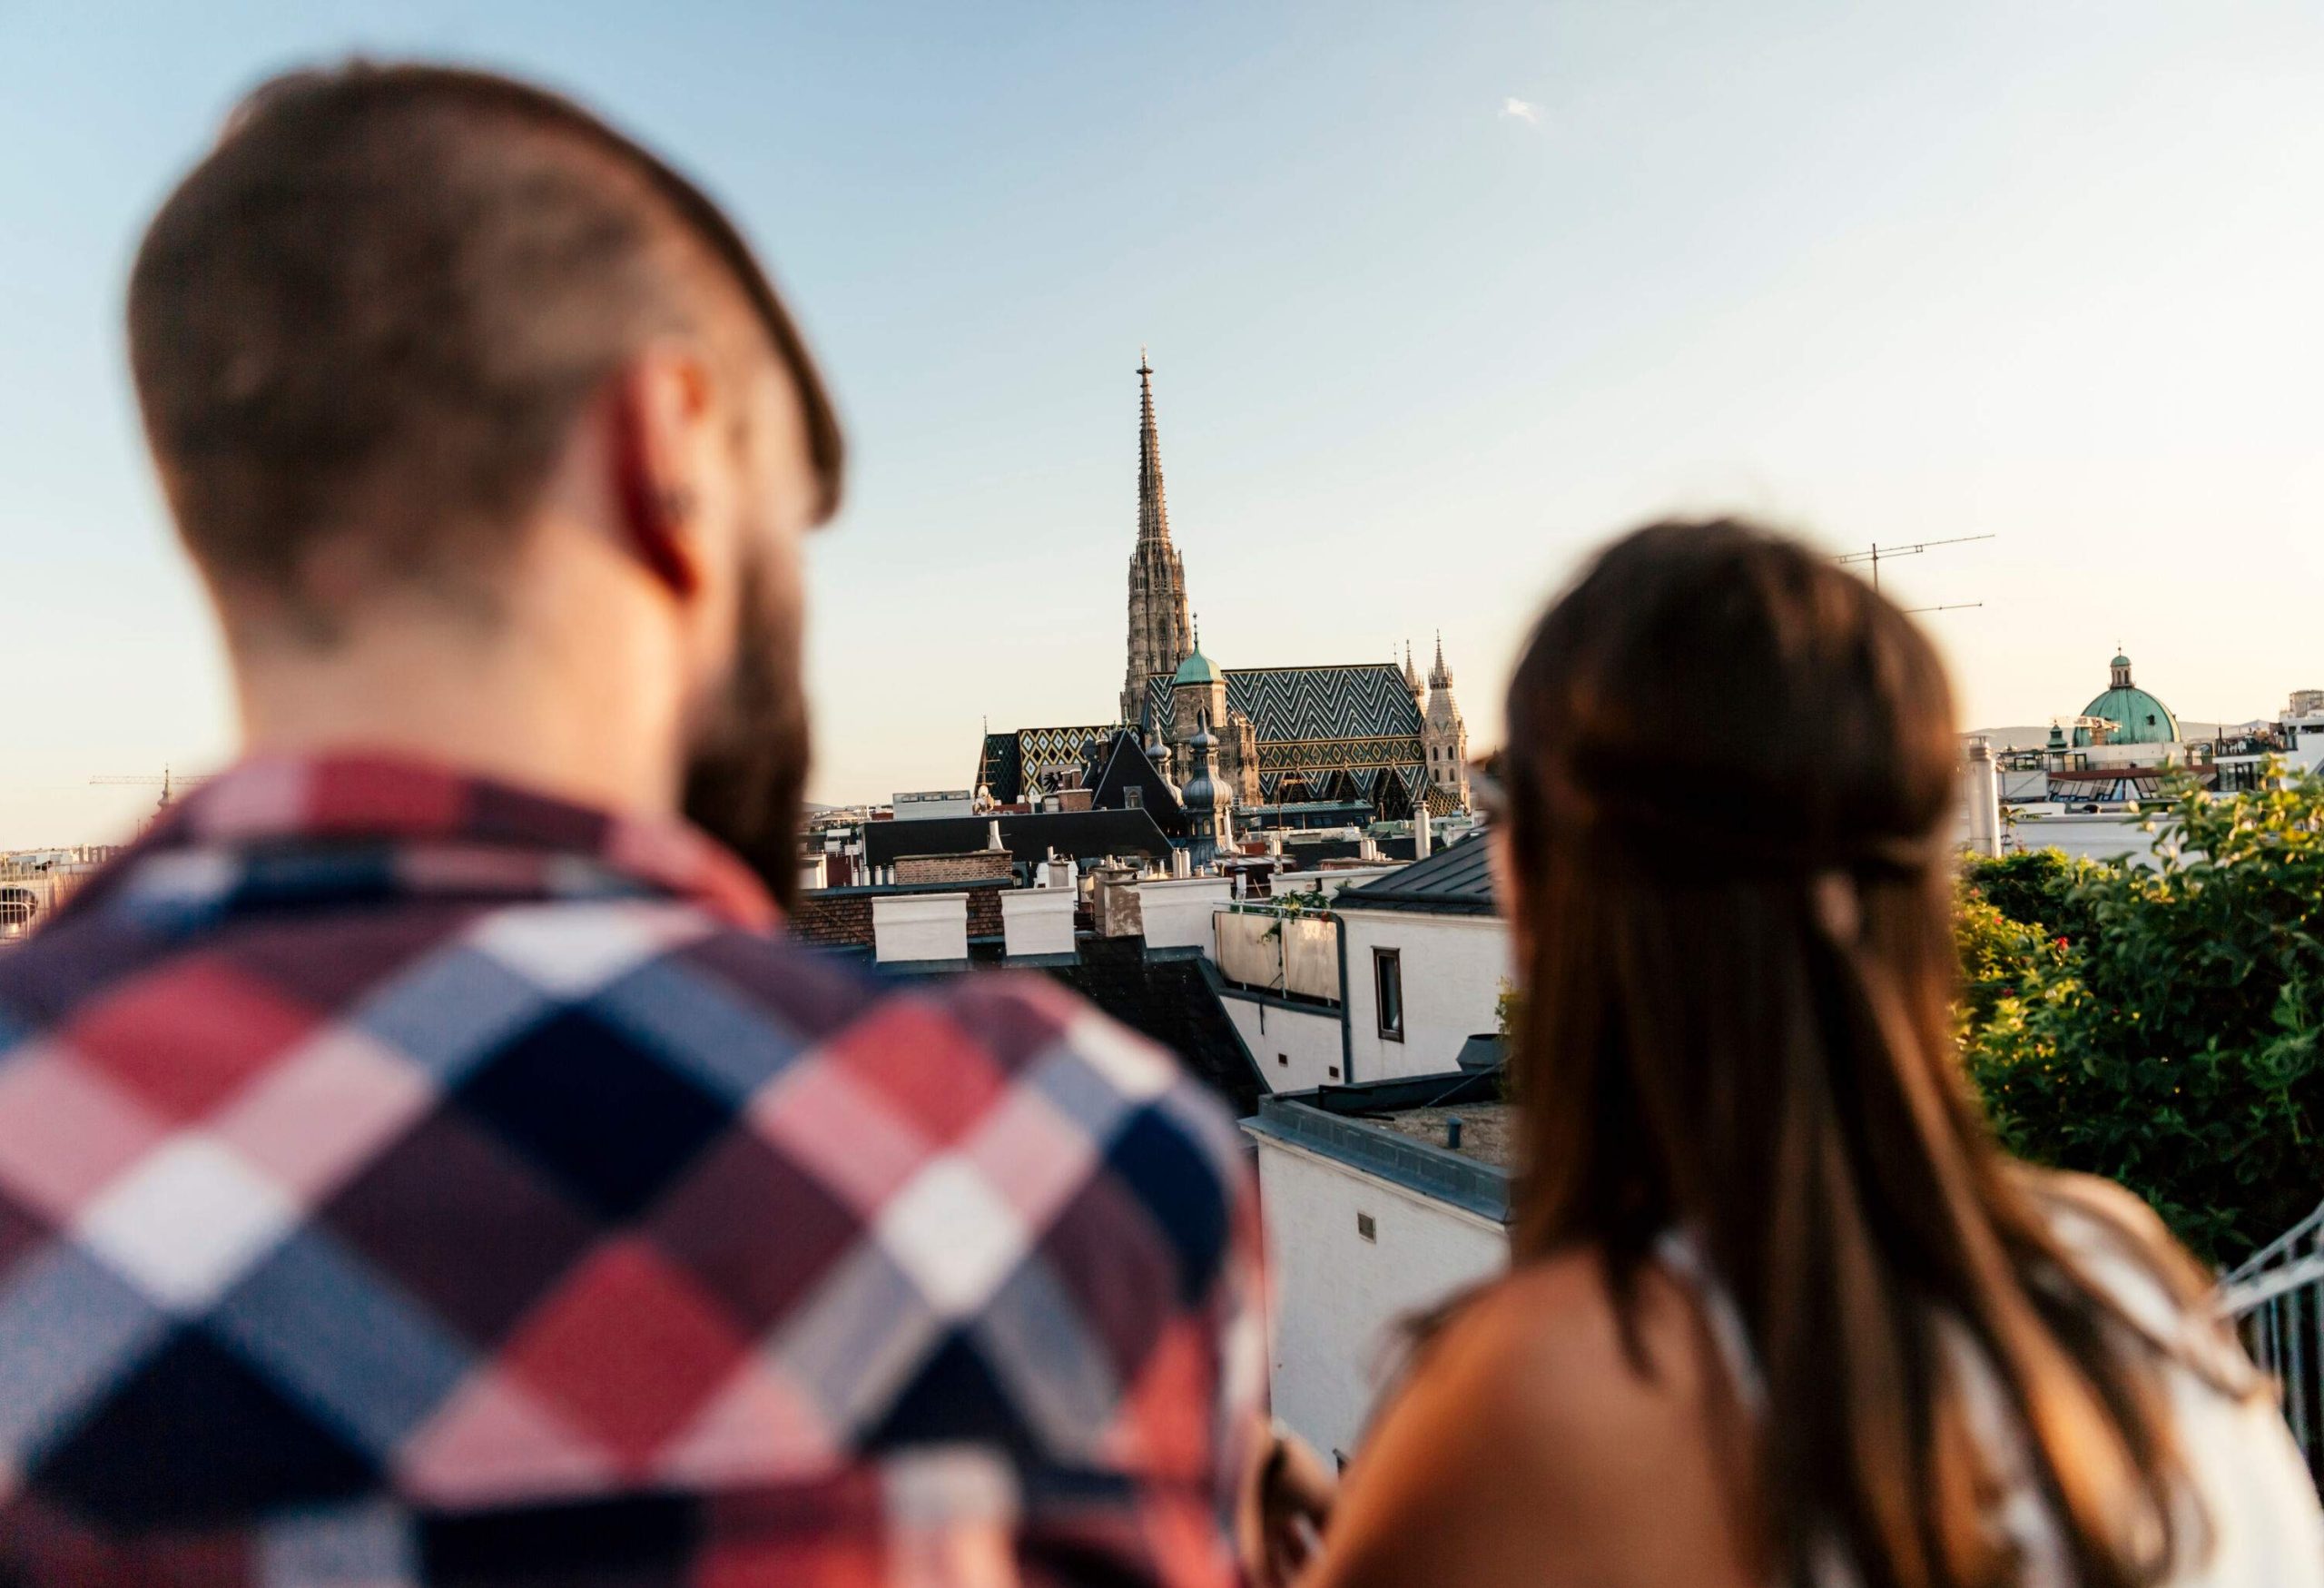 A man and woman on a terrace, looking over the city at a church spire.